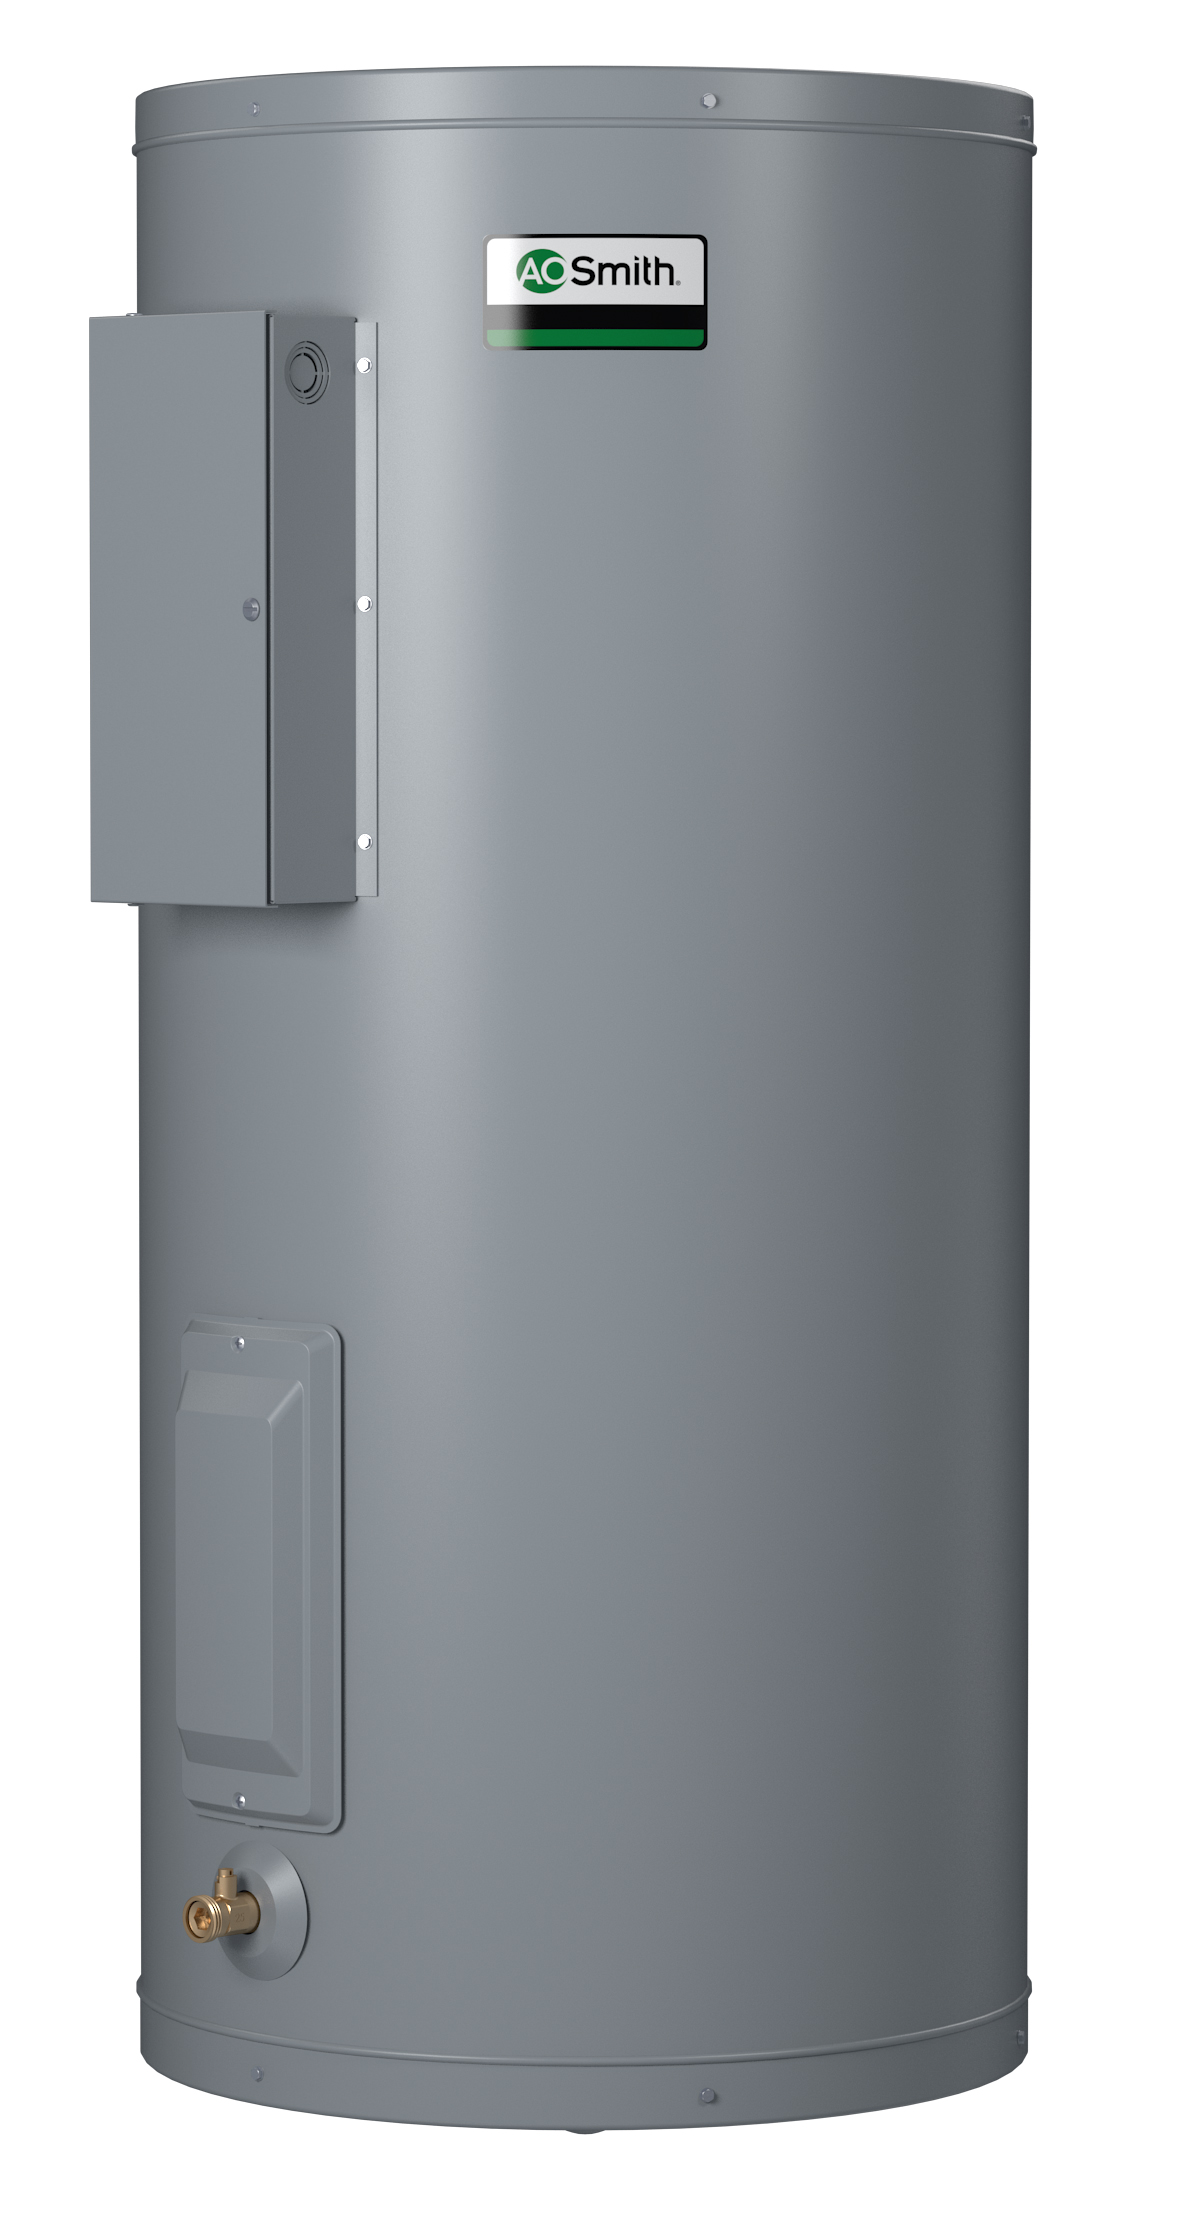 AO SMITH DEN-120D: 120 GALLONS, 2.5 KW, 240 VOLT, 3 PHASE, (2-2500 WATT ELEMENTS, NON-SIMULTANEOUS WIRING), DURA-POWER, LIGHT DUTY COMMERCIAL ELECTRIC WATER HEATER